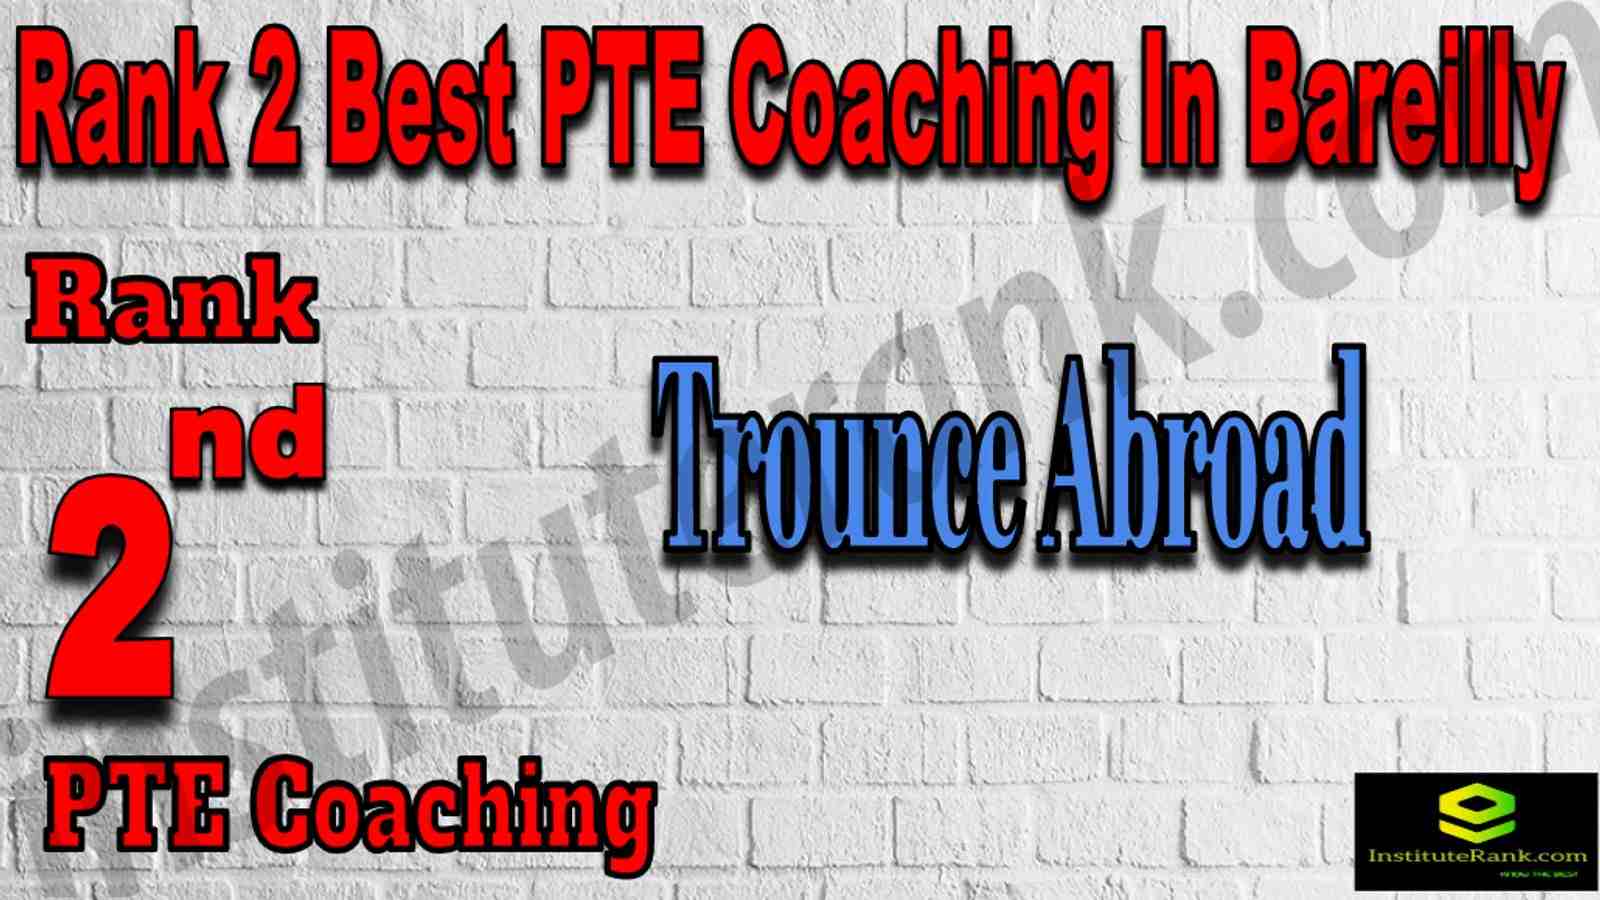 Rank 2 Best PTE Coaching In Bareilly